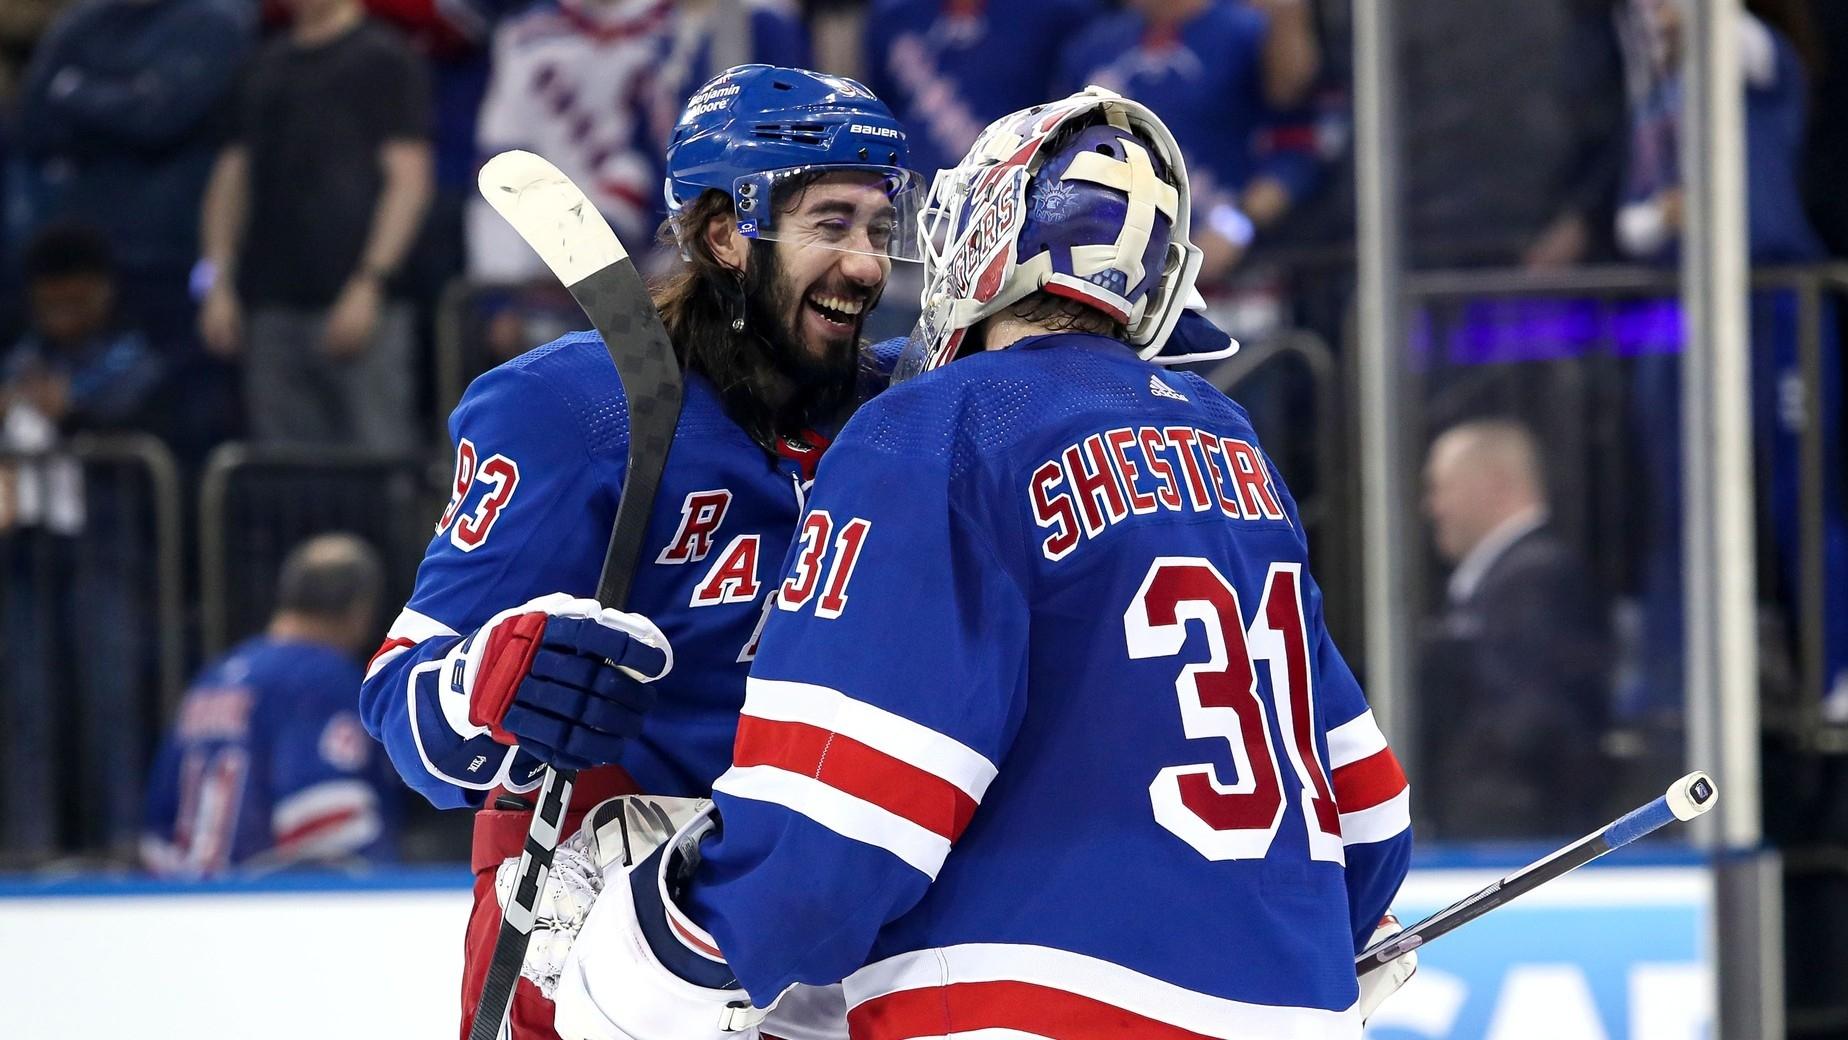 New York Rangers center Mika Zibanejad (93) and goalie Igor Shesterkin (31) celebrate after a 5-2 win against the New Jersey Devils in game six of the first round of the 2023 Stanley Cup Playoffs. / Danny Wild-USA TODAY Sports